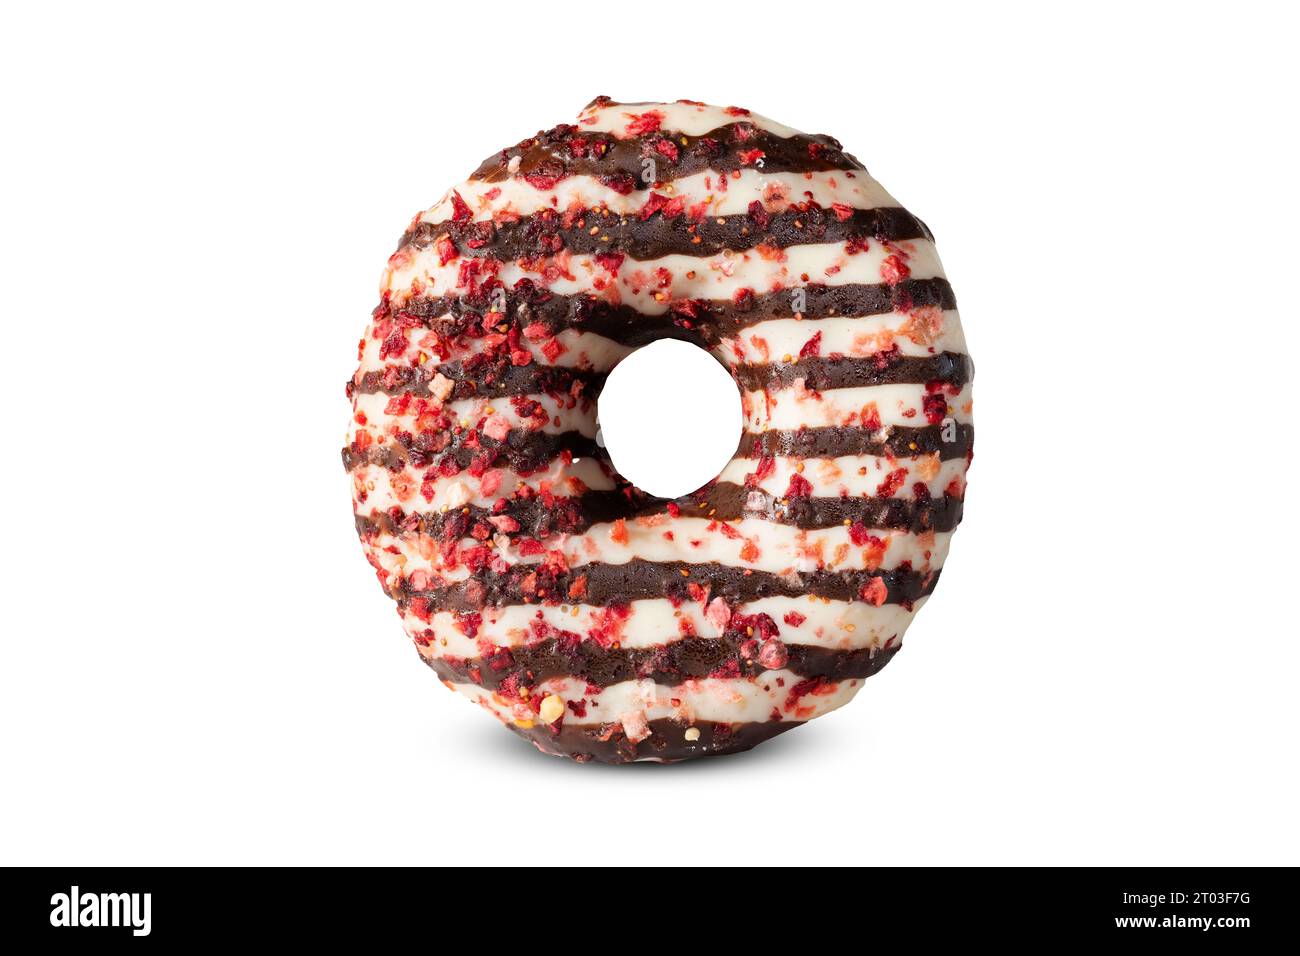 A trio of donuts—chocolate, white chocolate, and strawberry rest against a pure white background, creating a luscious contrast that makes their rich c Stock Photo